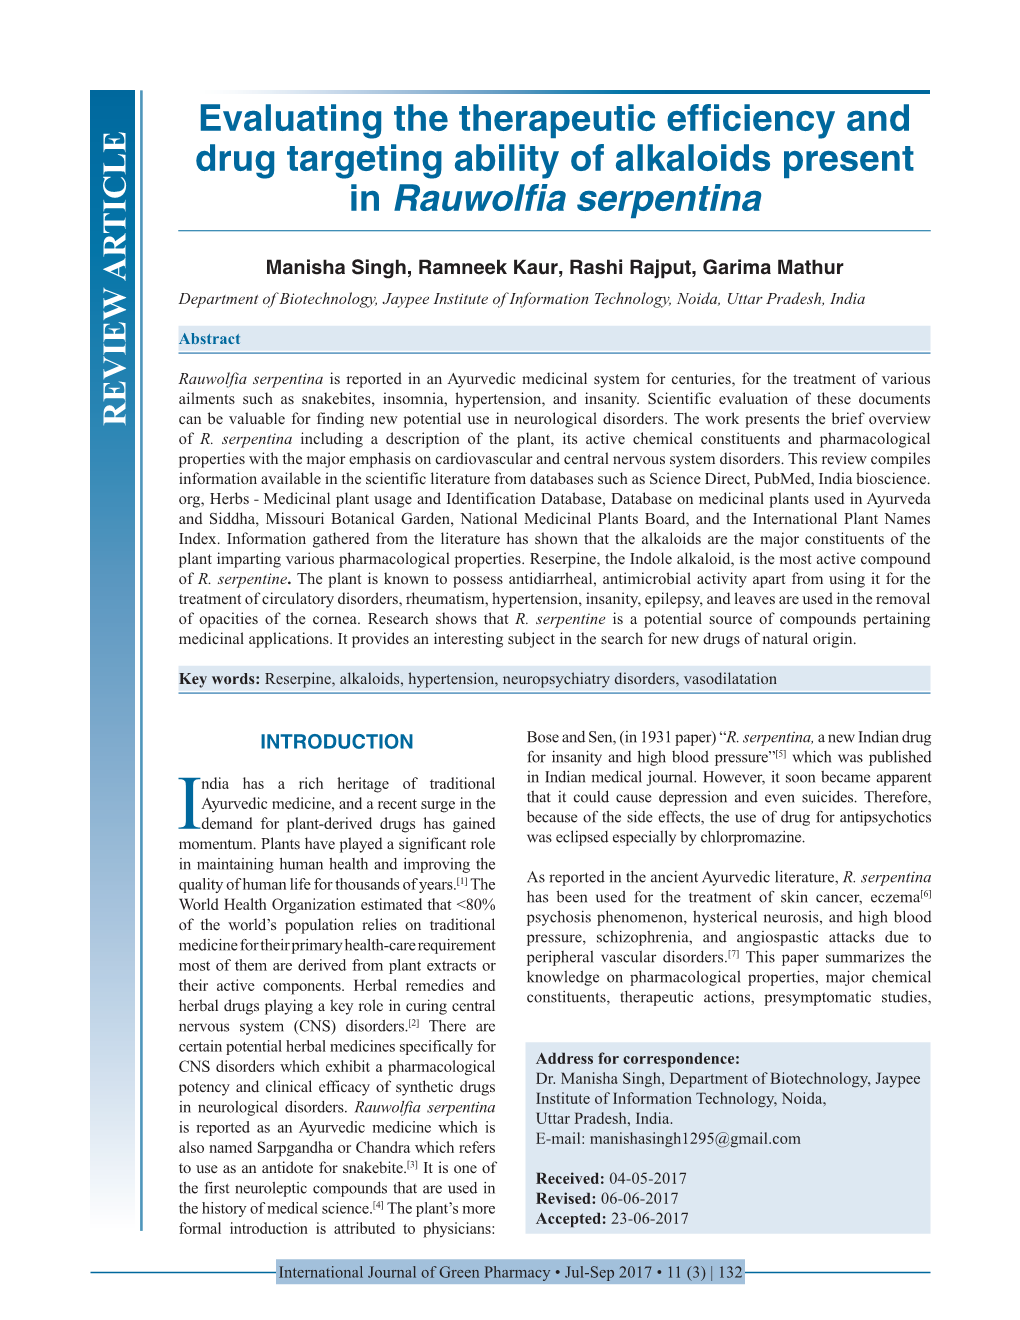 Evaluating the Therapeutic Efficiency and Drug Targeting Ability of Alkaloids Present in Rauwolfia Serpentina